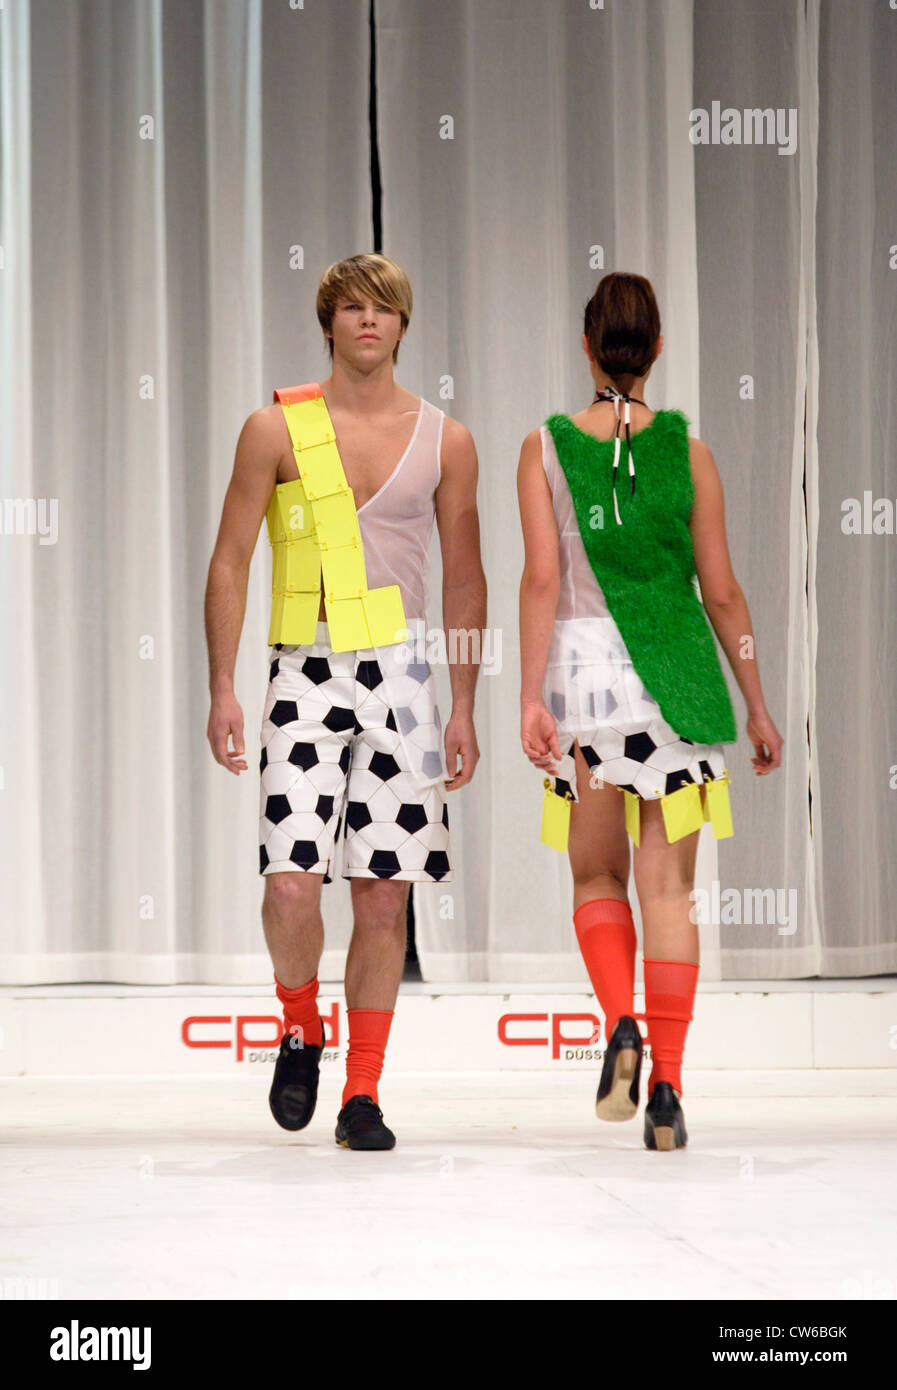 CPD fashion fair in Duesseldorf, CATWALK WITH BALL Stock Photo